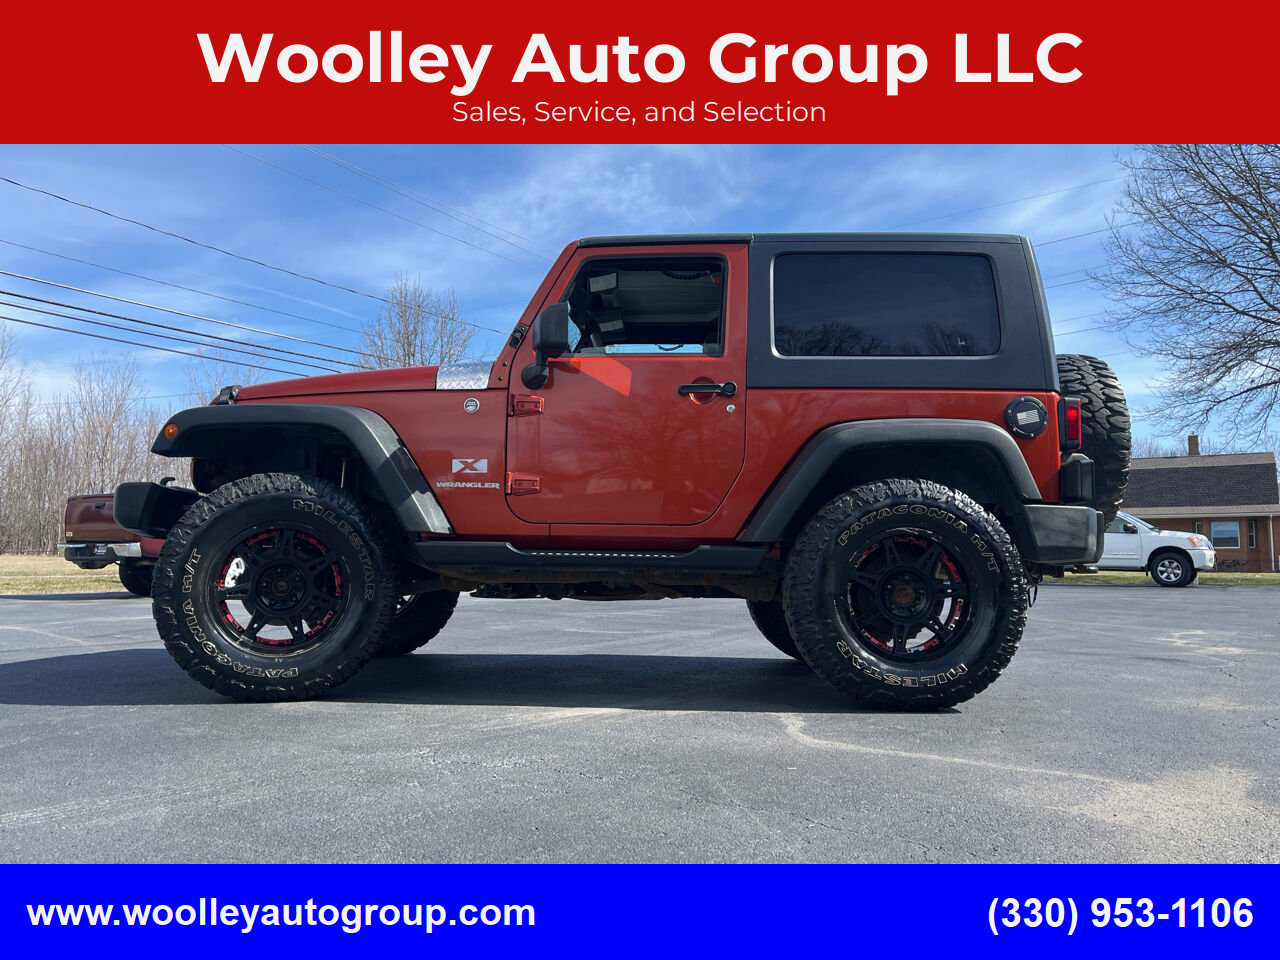 2009 Jeep Wrangler For Sale In Pittsburgh, PA ®